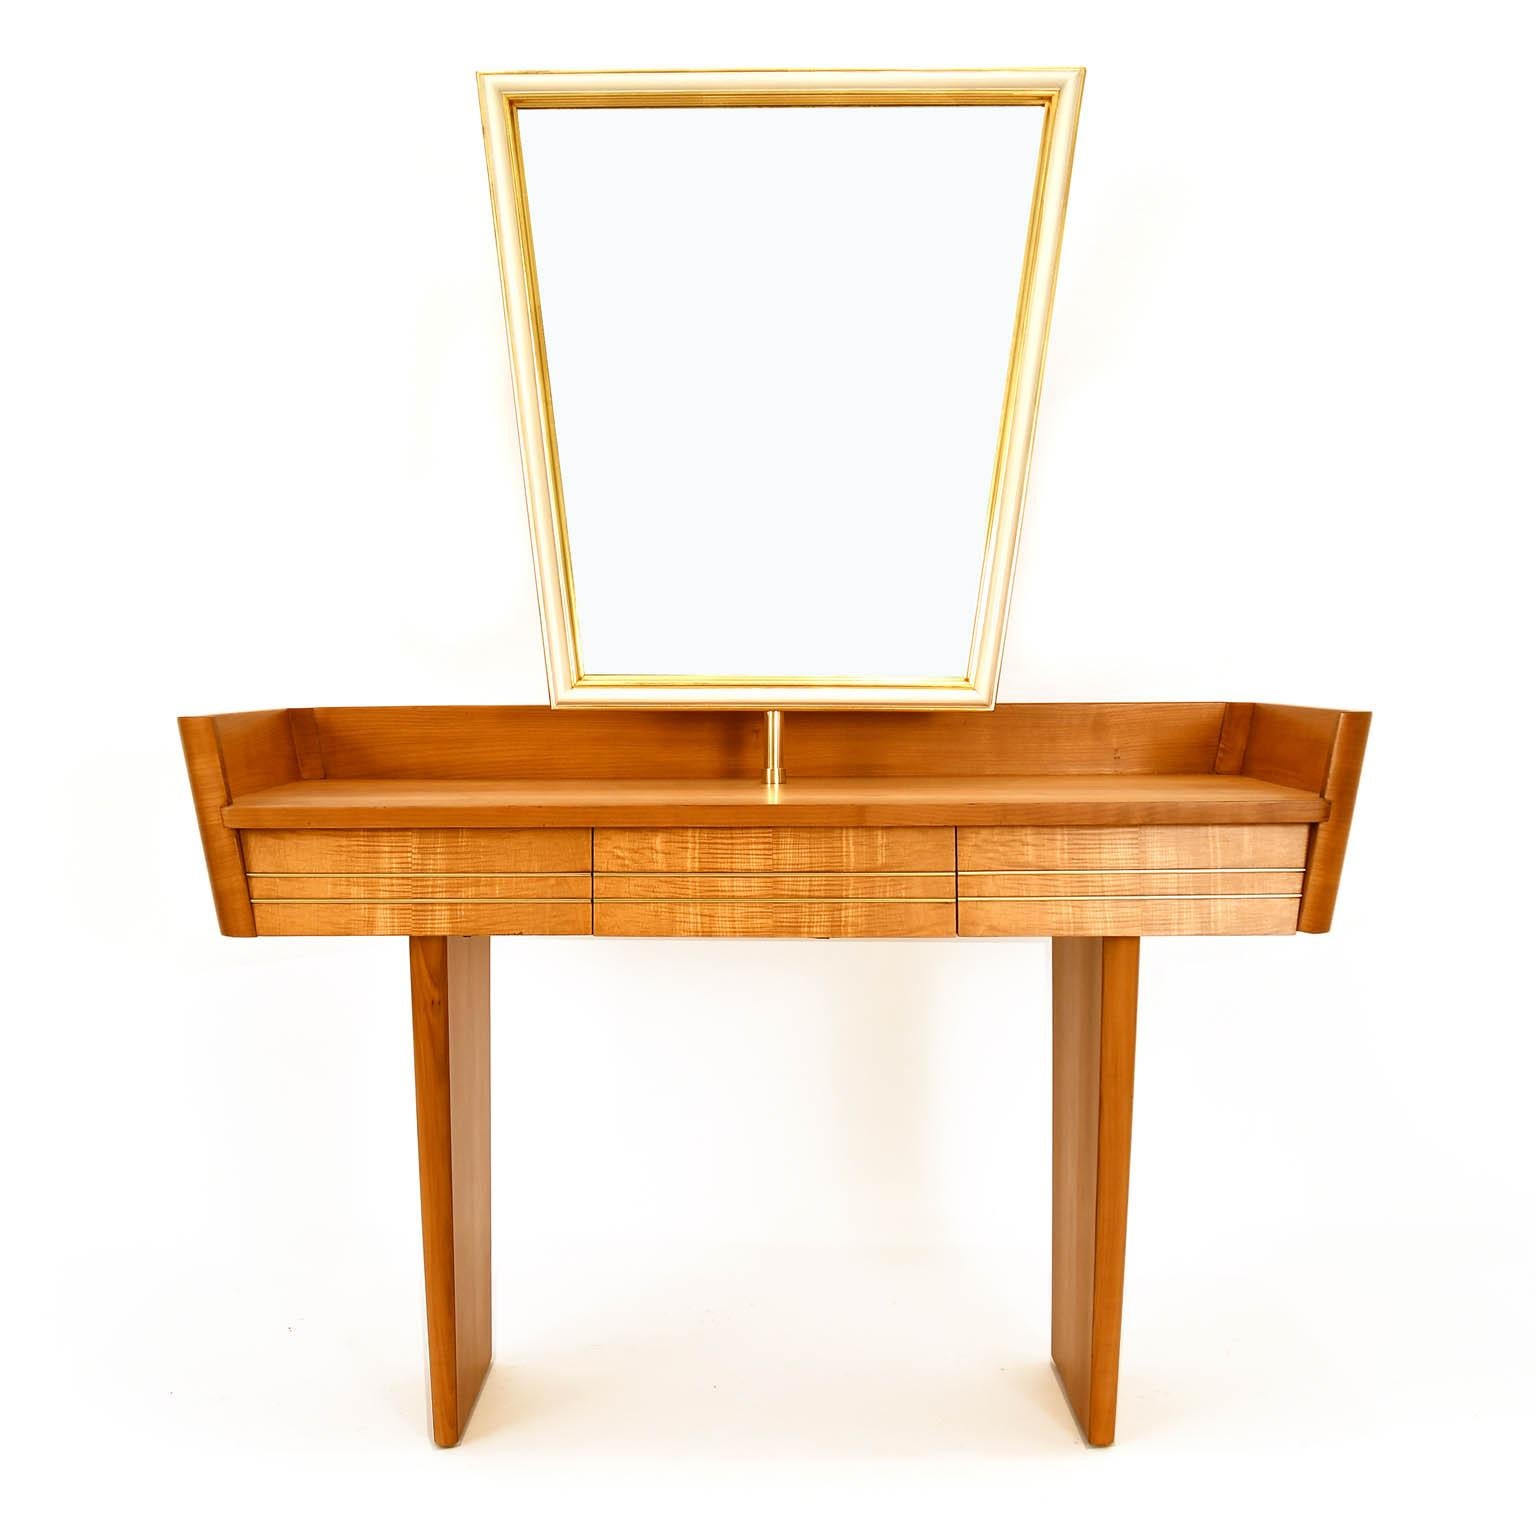 Midcentury dressing table made in Austria. The frame is made of solid cherrywood and softwood with cherry veneer. The three drawers have metall inlays made of brass. The mirrow's frame is partly lacquered in gold and creme color. A brass